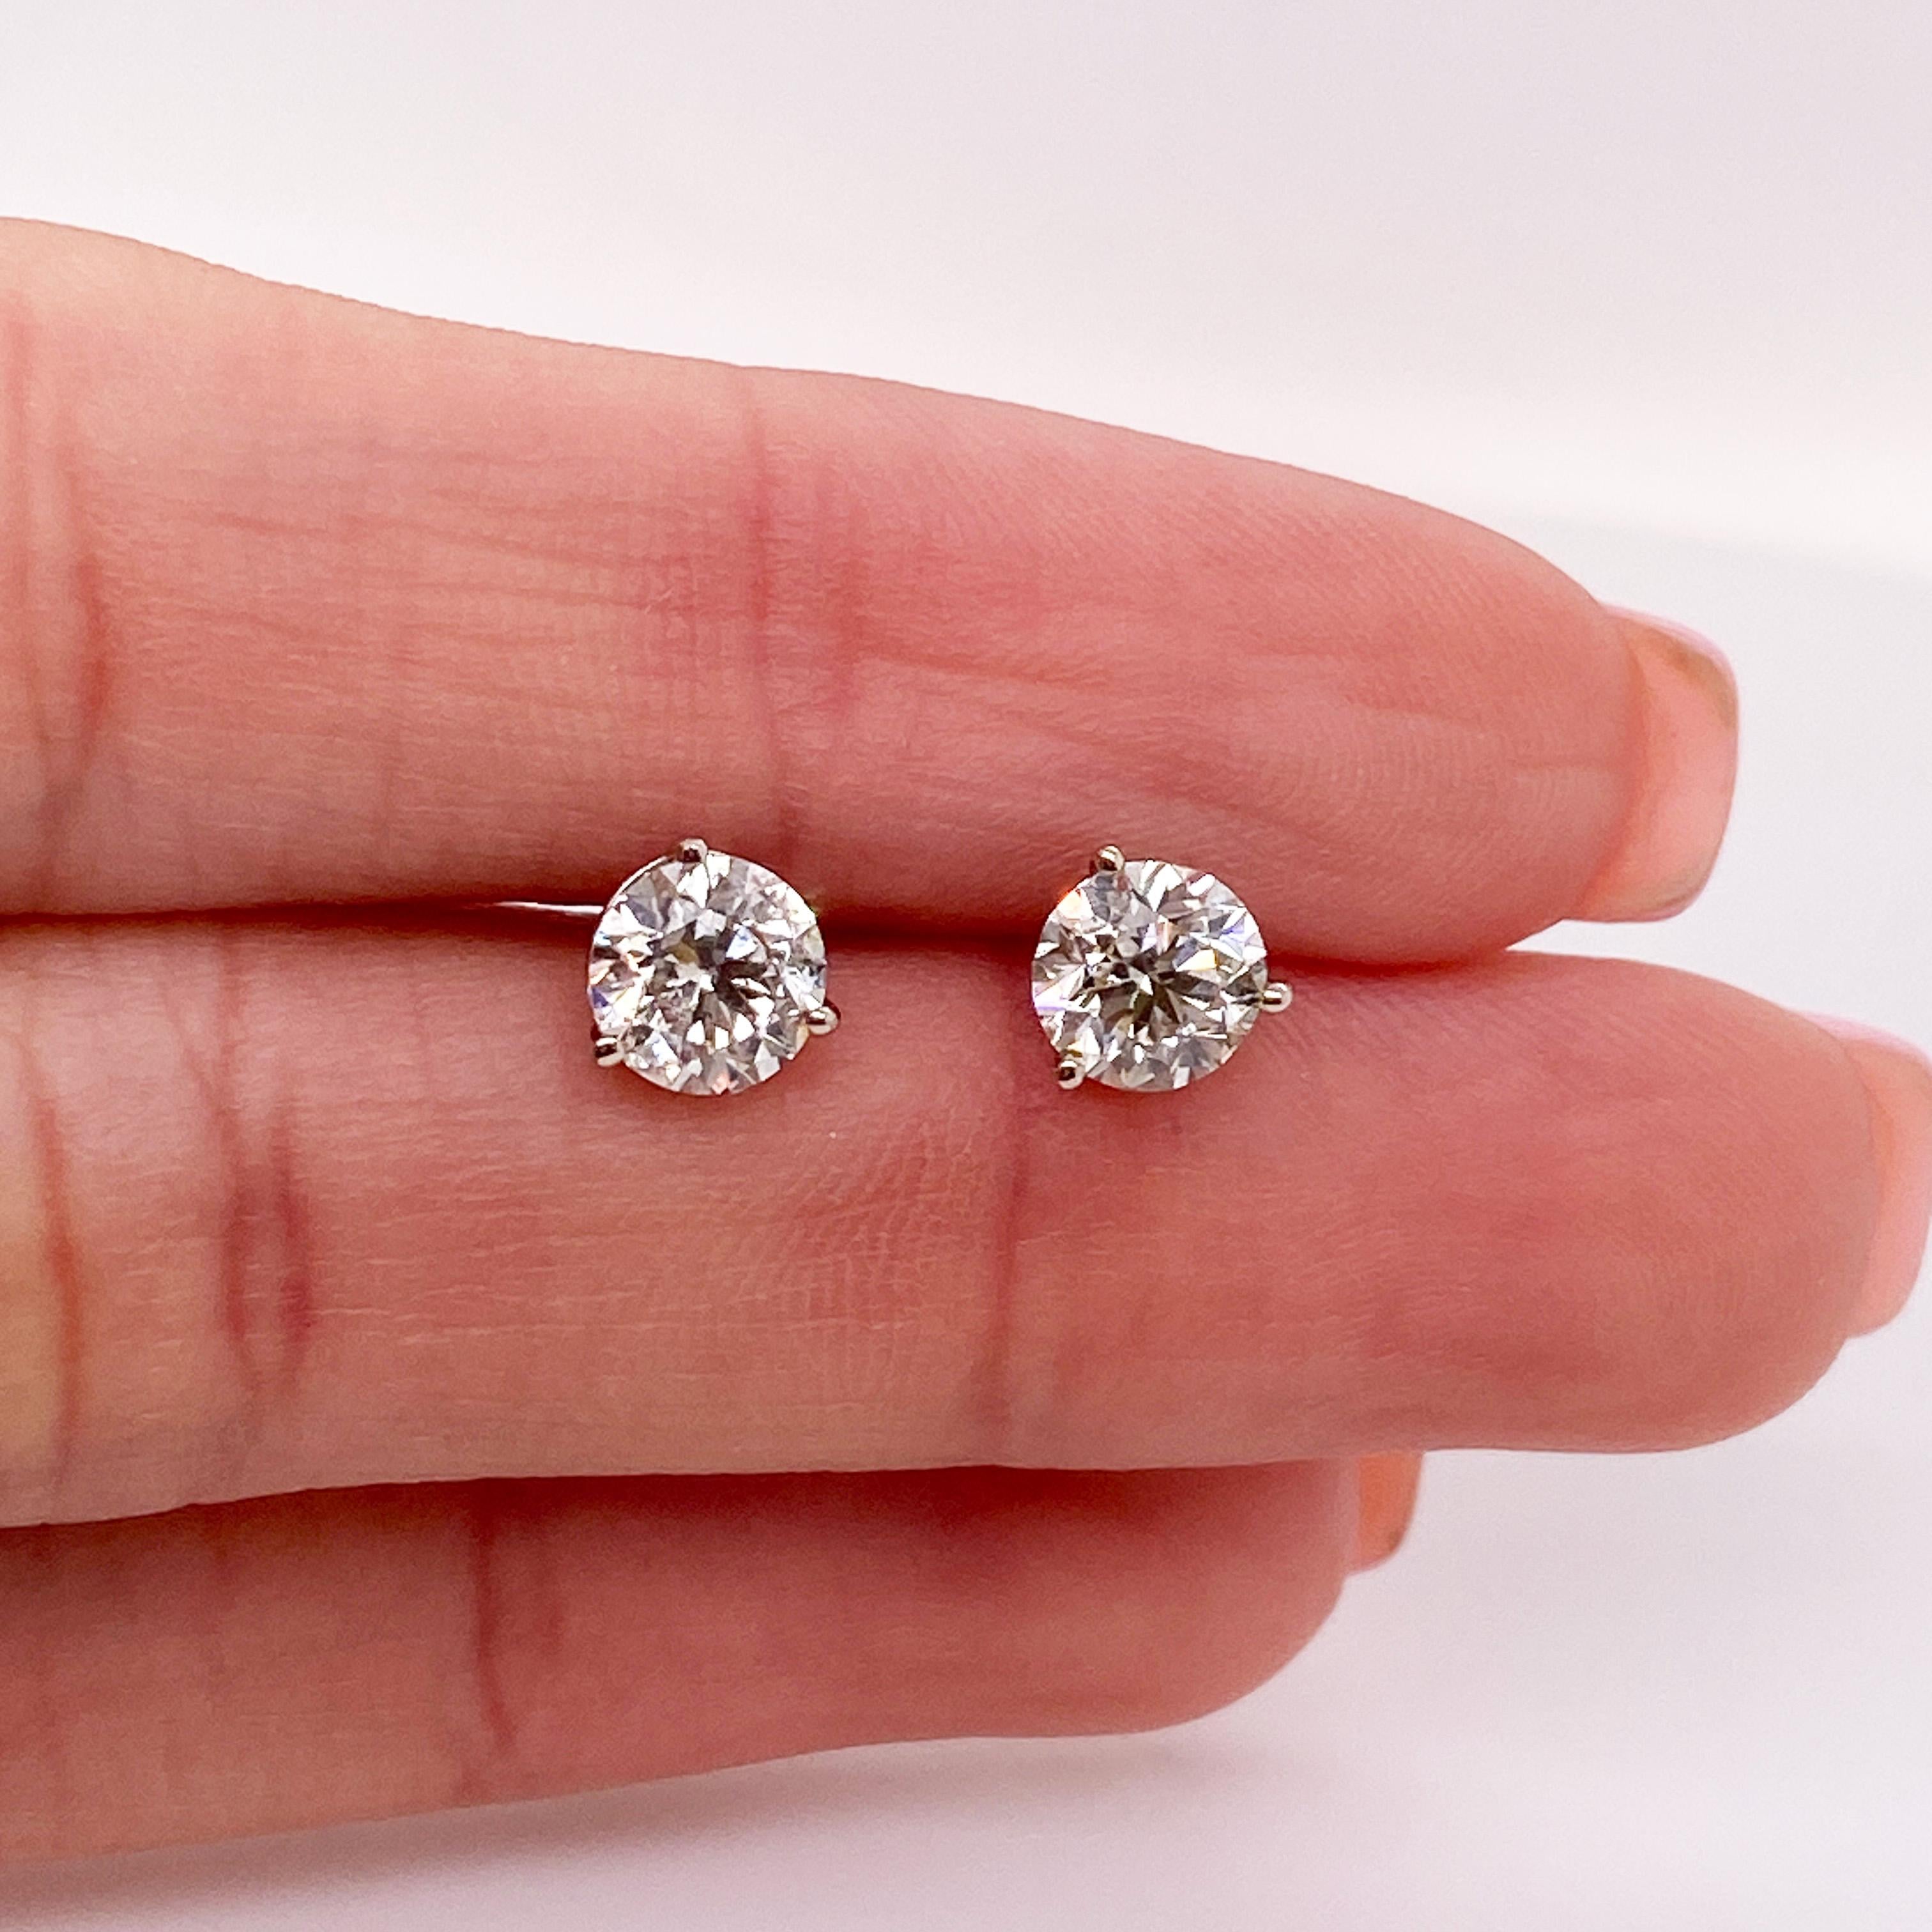 These stunning martini stud diamond earrings are perfect for any ear! Wear them alone or next to other favorite earrings. Martini studs are popular because they have a low profile close to the ear and still keep the stone proudly displayed for